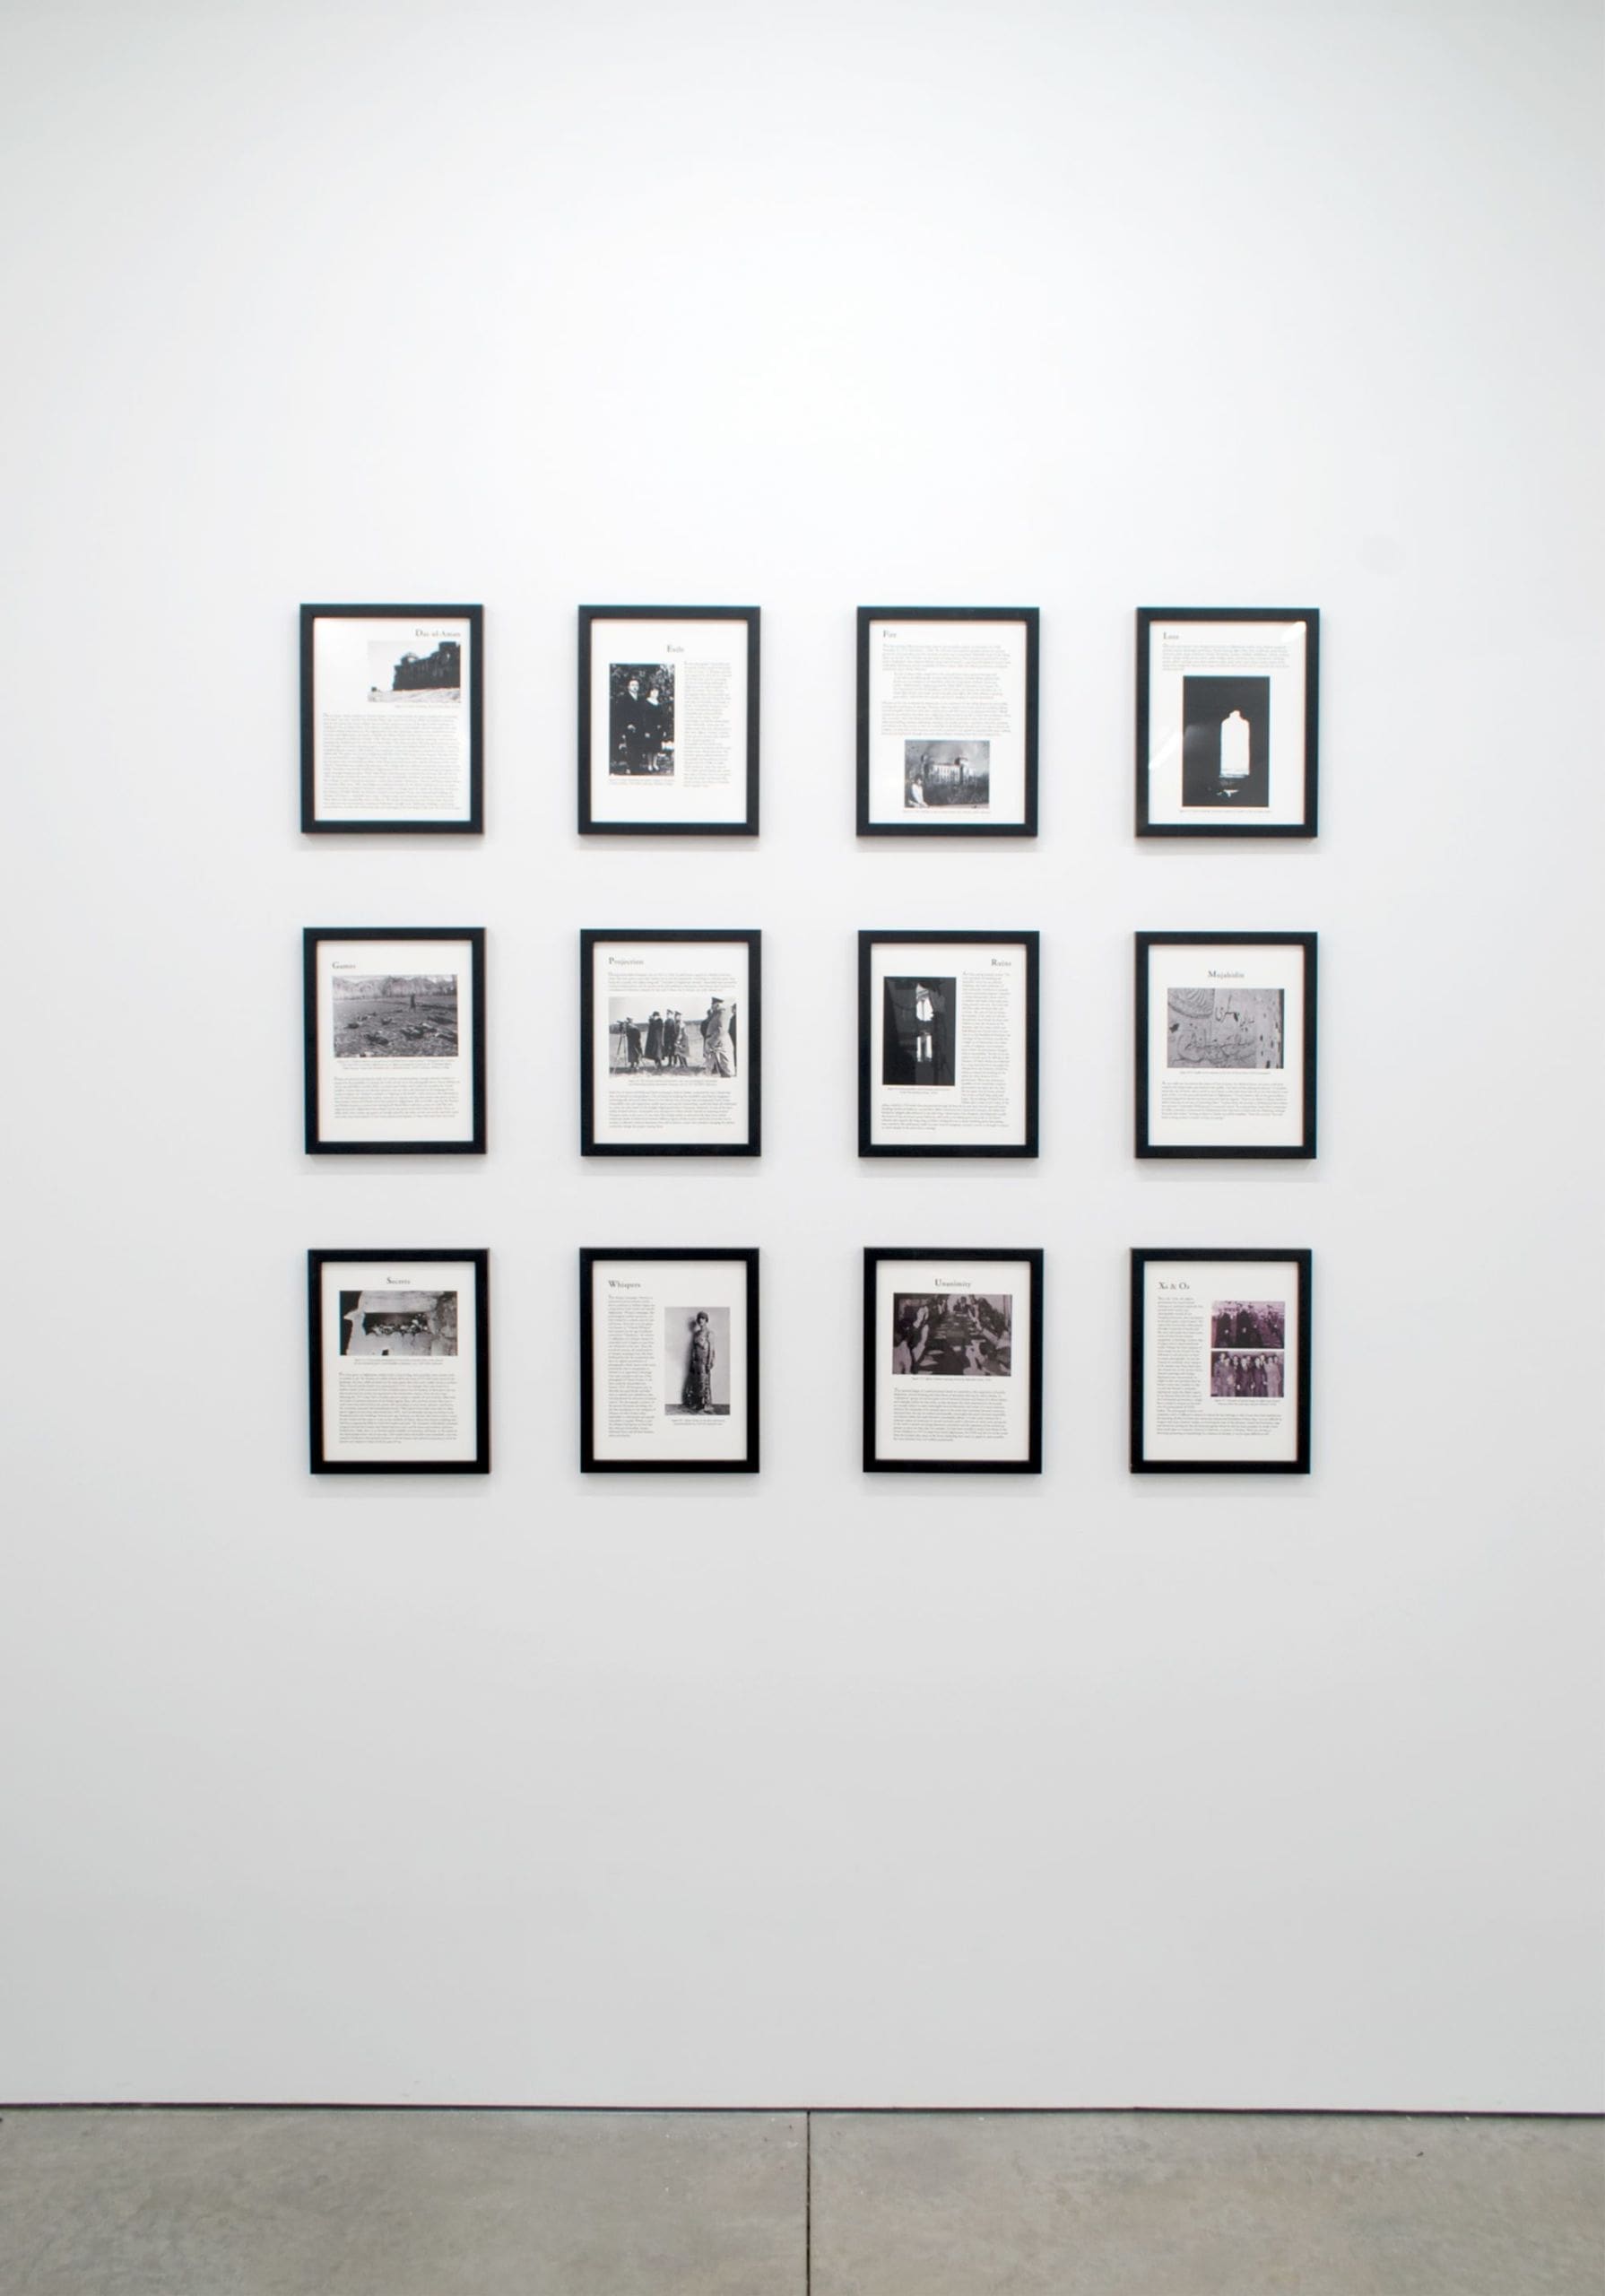 Afghanistan: A Lexicon, 2012, Set of 12 pigment prints on BFK Rives paper, 8 1/2 x 11 inches each (21.59 x 27.94 cm), Edition of 10